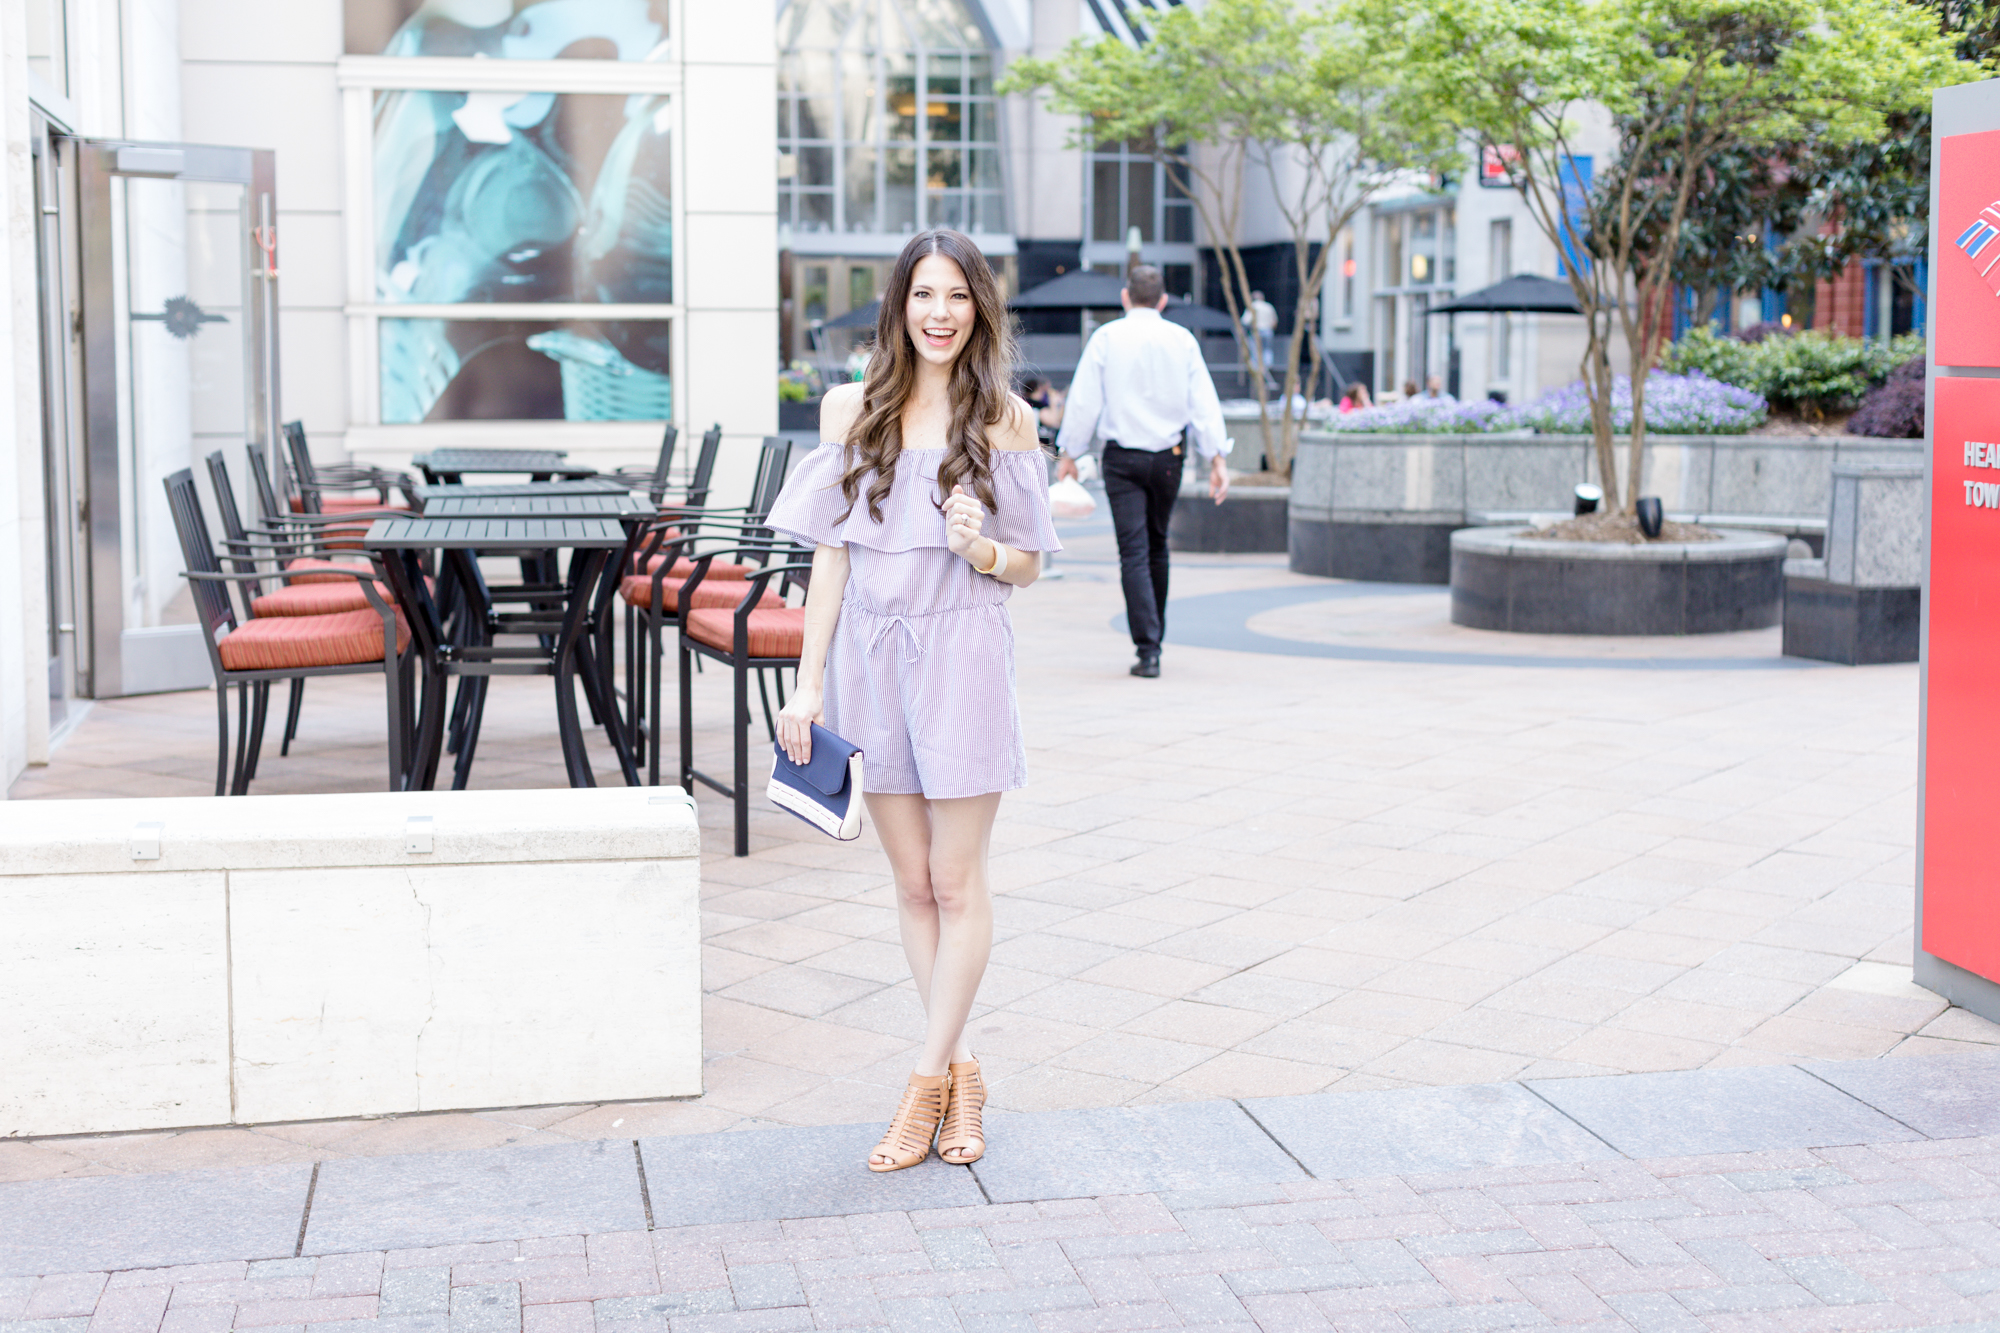 Ruffle Romper | Lifestyle blogger Elle Bowes shares a spring style inspiration.